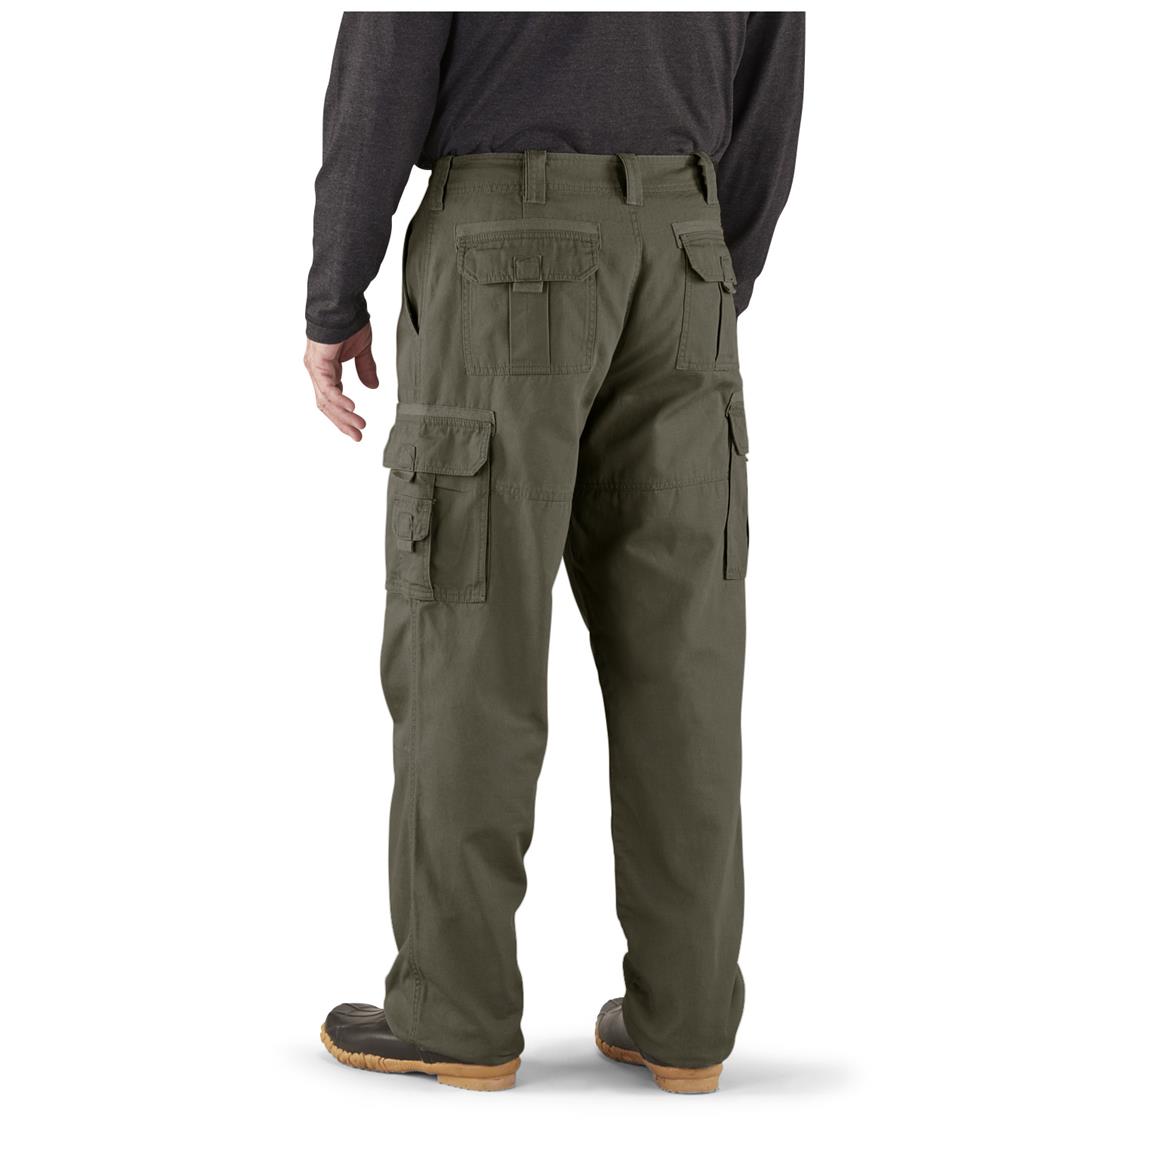 Men's Cargo Pants, Flannel Lined - 224165, Insulated Pants, Overalls ...